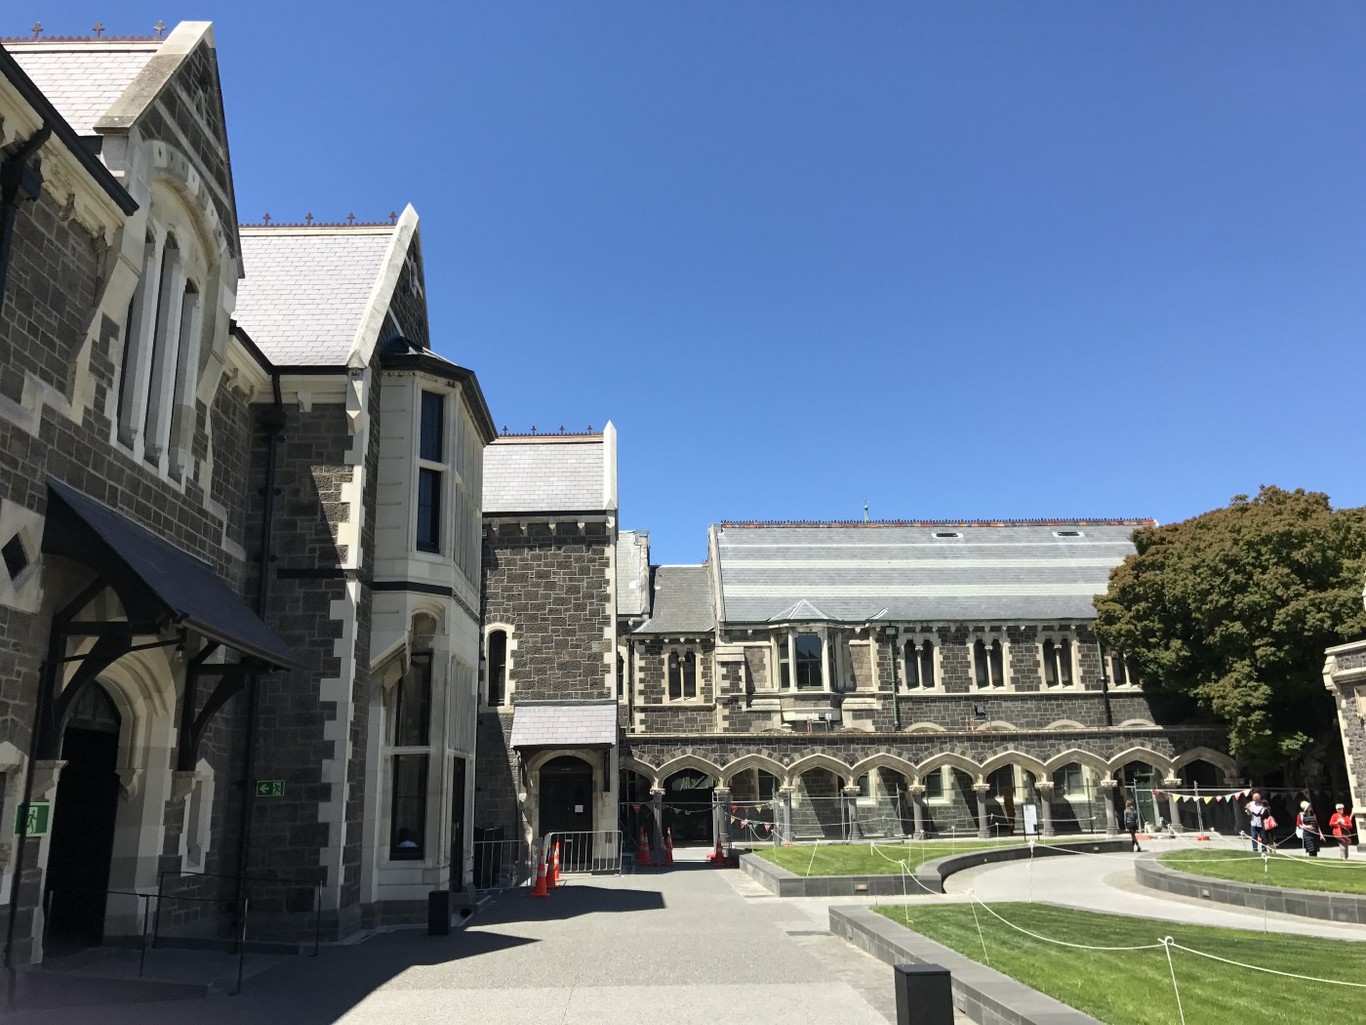 The Canterbury College buildings